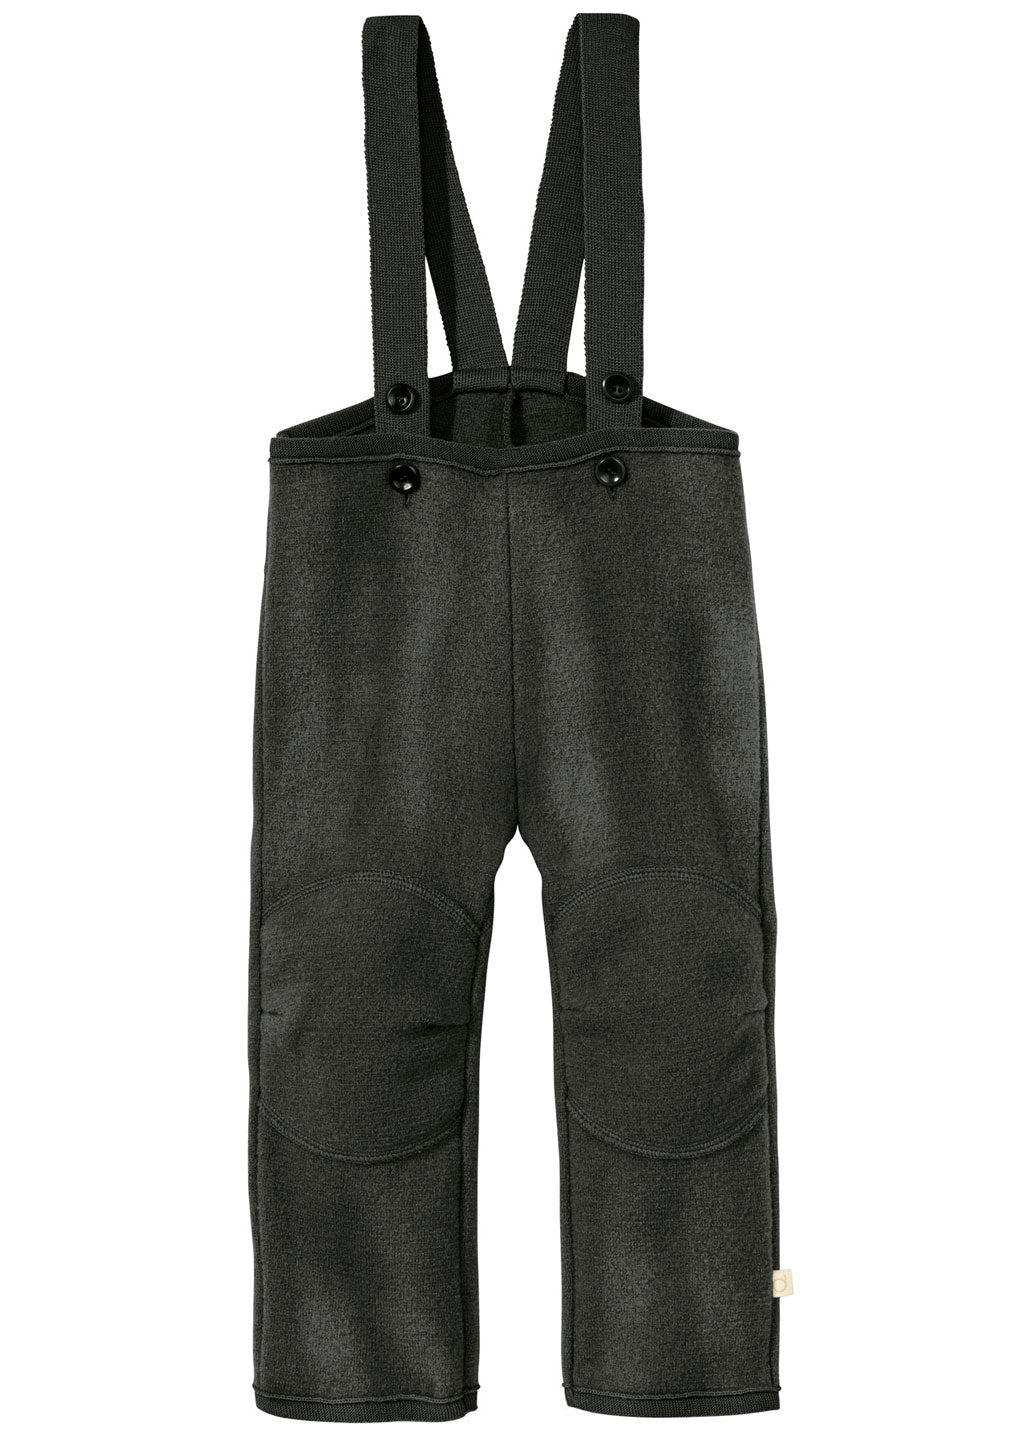 Disana boiled wool trousers in charcoal 